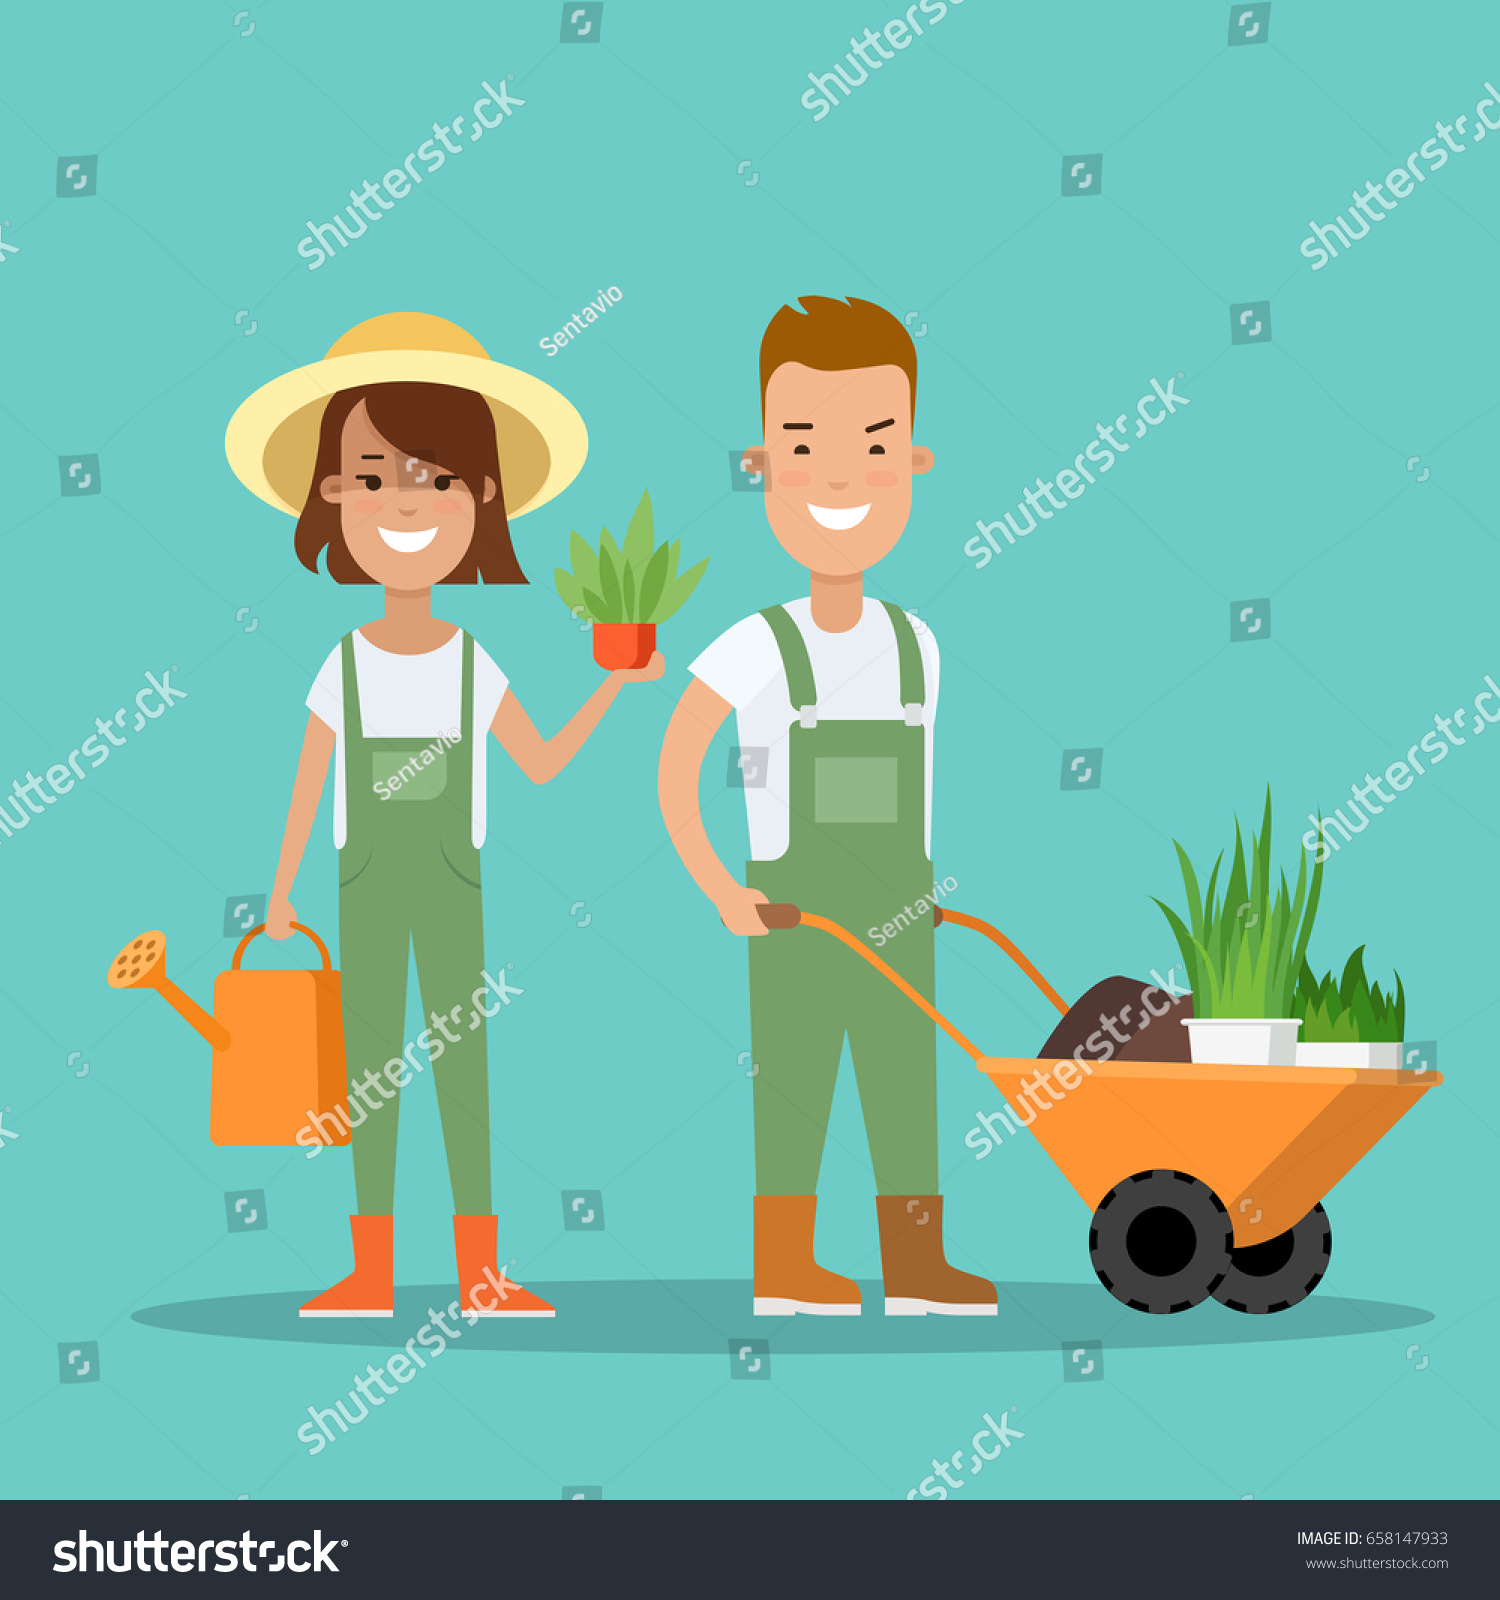 Flat Young Man Woman Holding Plant Stock Vector 658147933 - Shutterstock